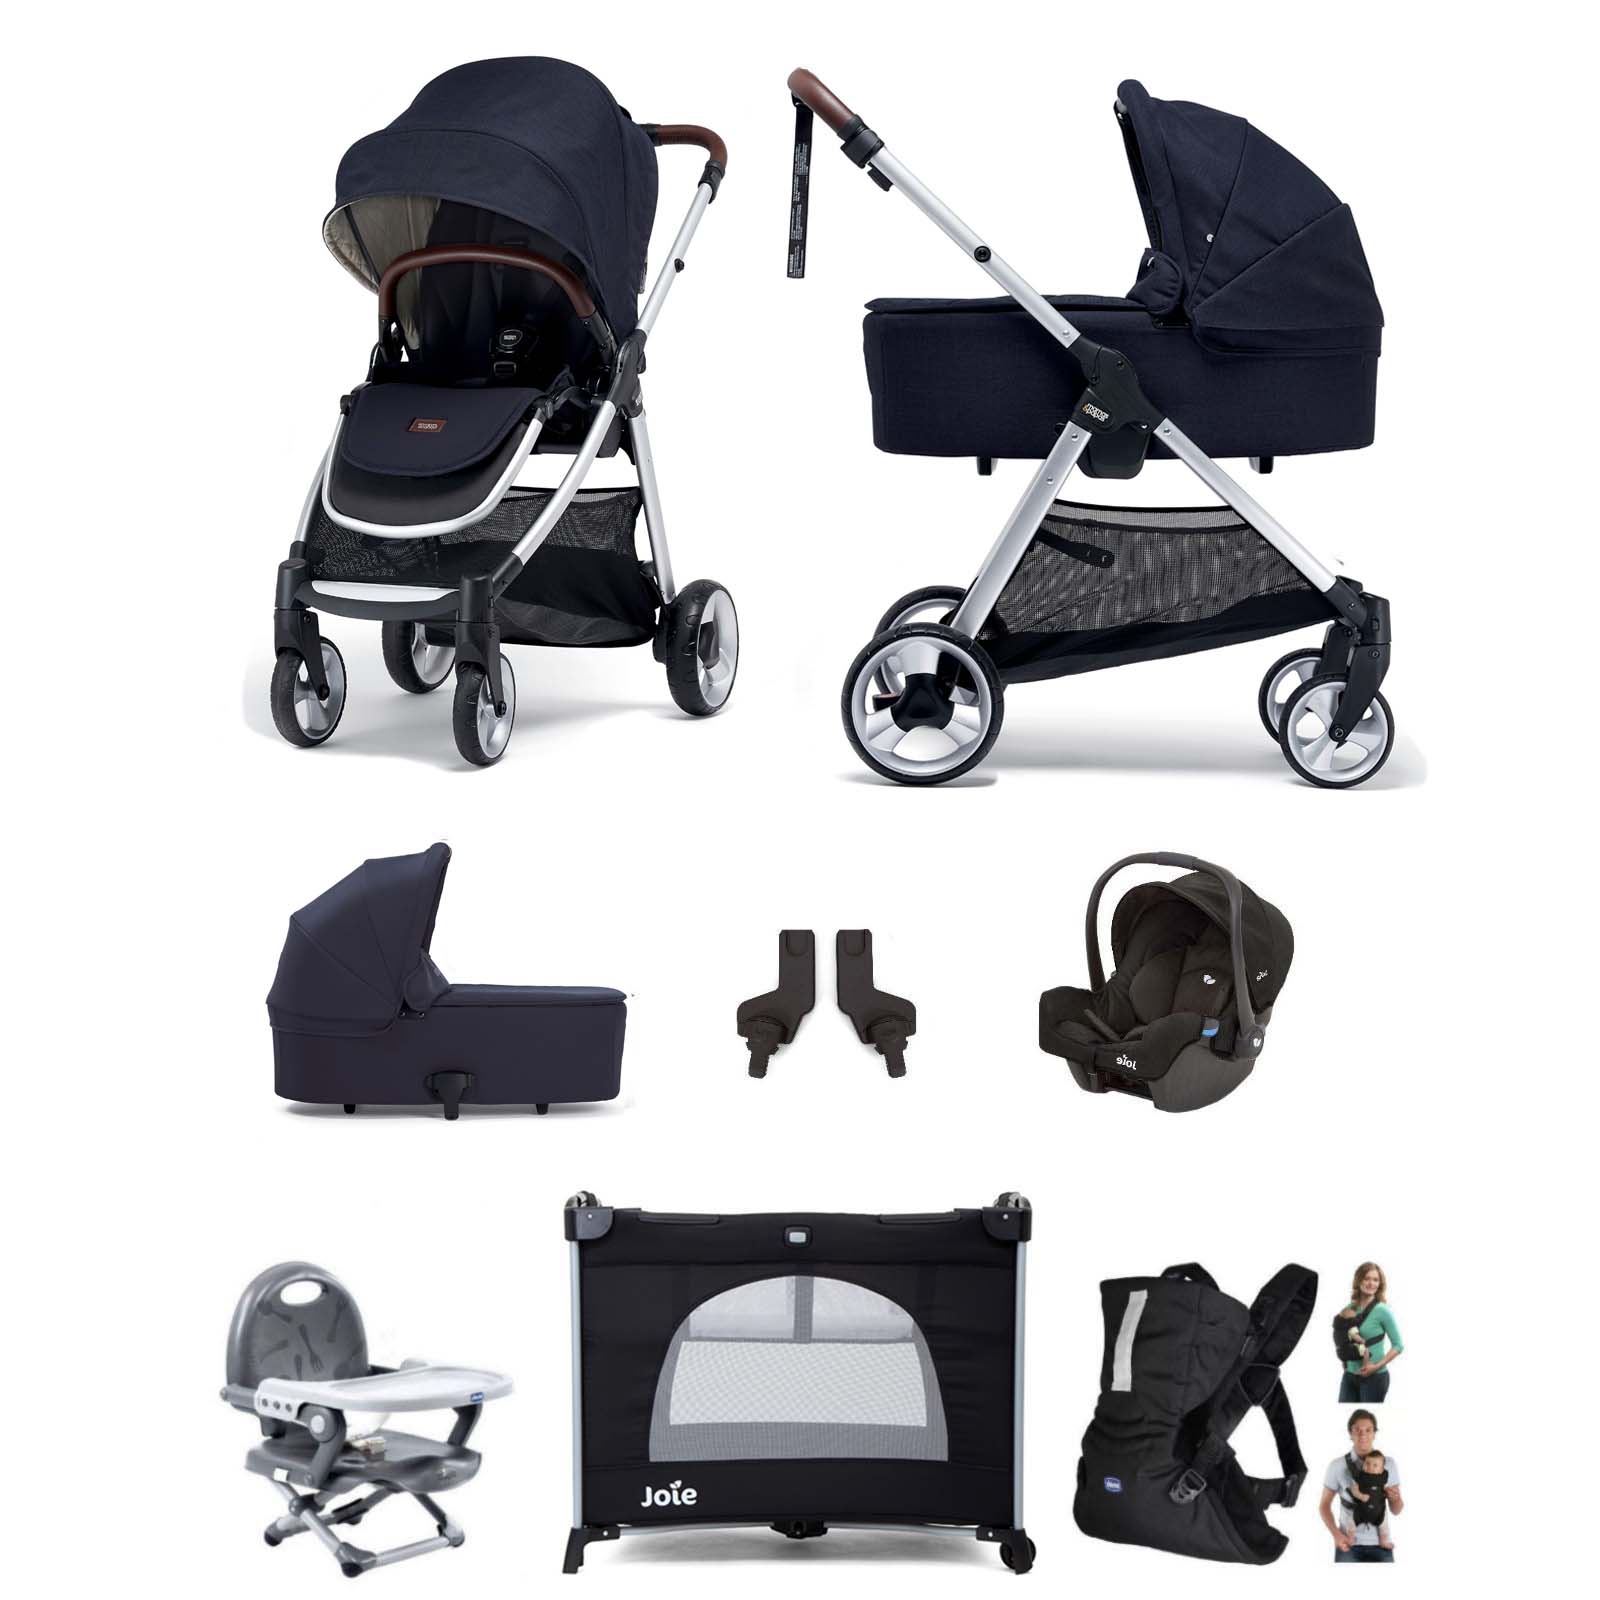 Mamas & Papas Flip XT2 (Gemm Car Seat) Everything You Need Travel System Bundle with Carrycot - Navy